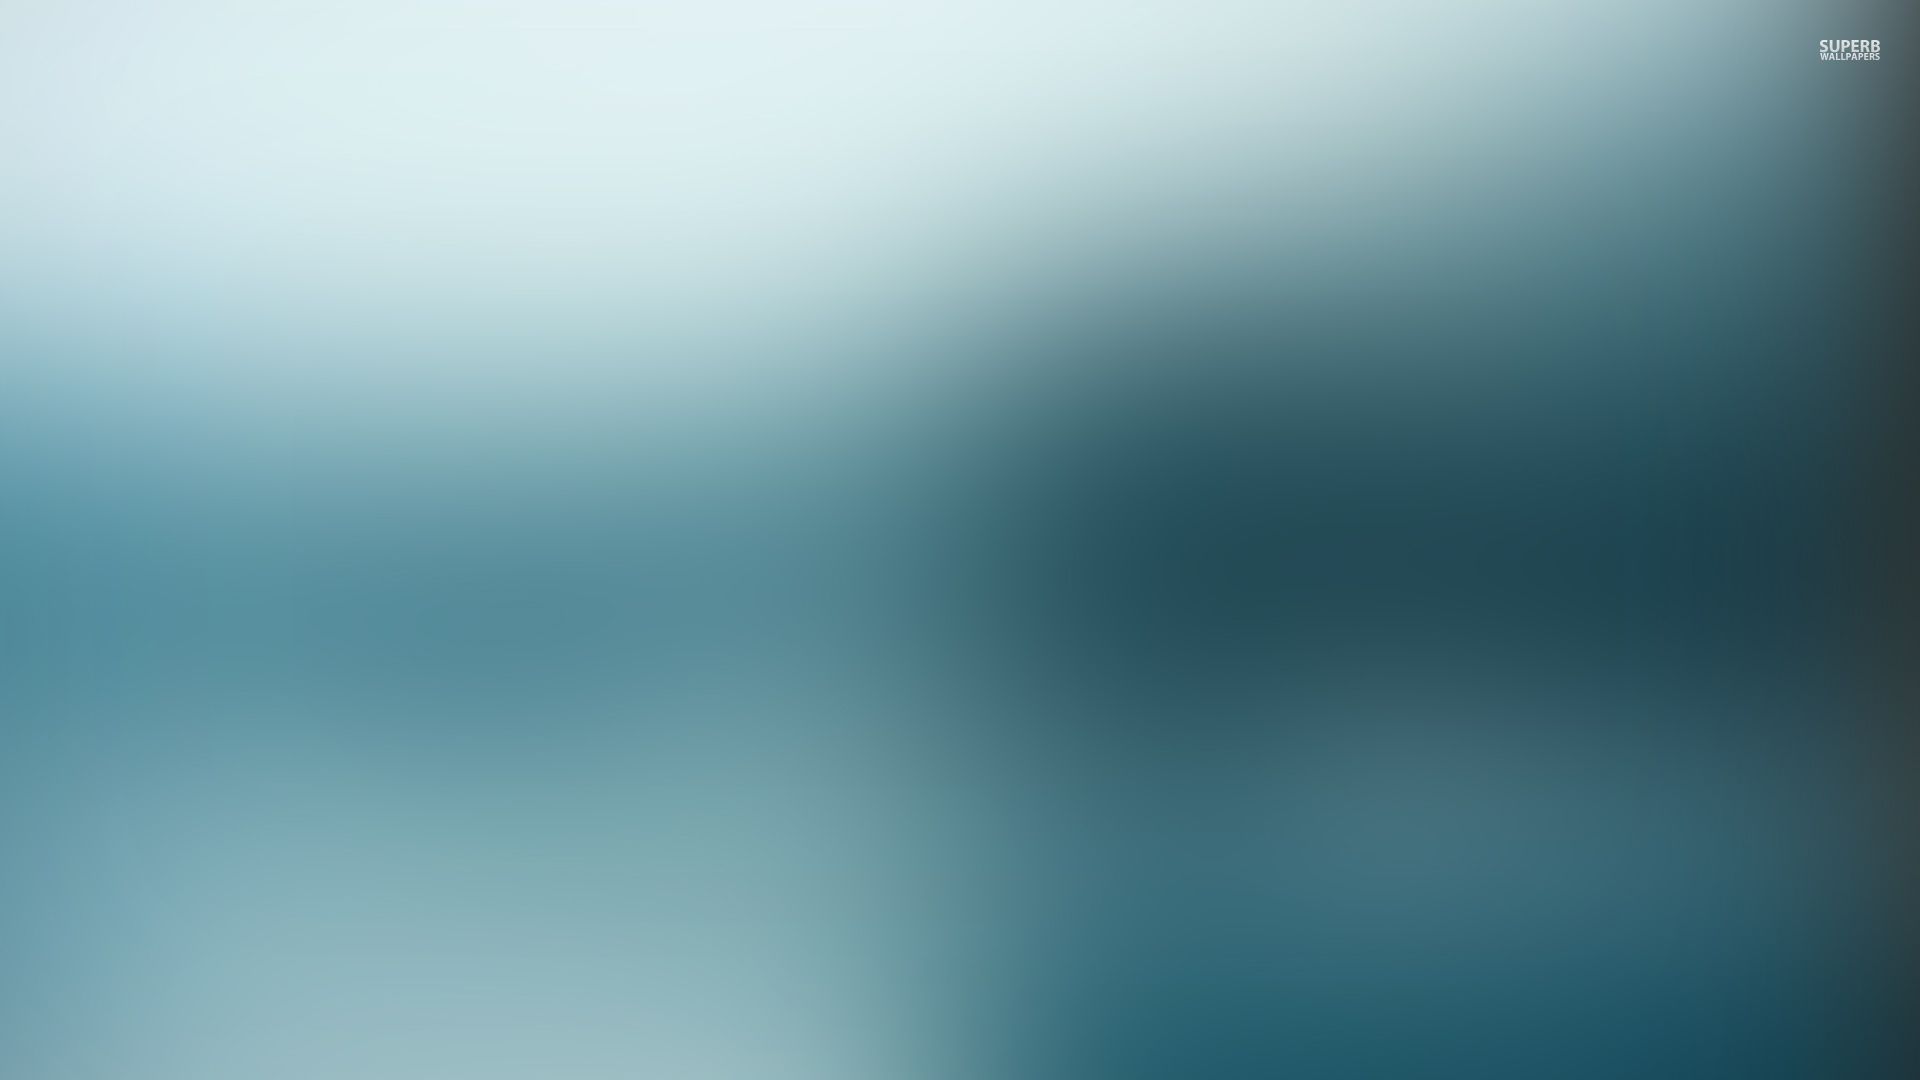 Hd Quality Images Of Blur - Blue Grey Background Blur - HD Wallpaper 